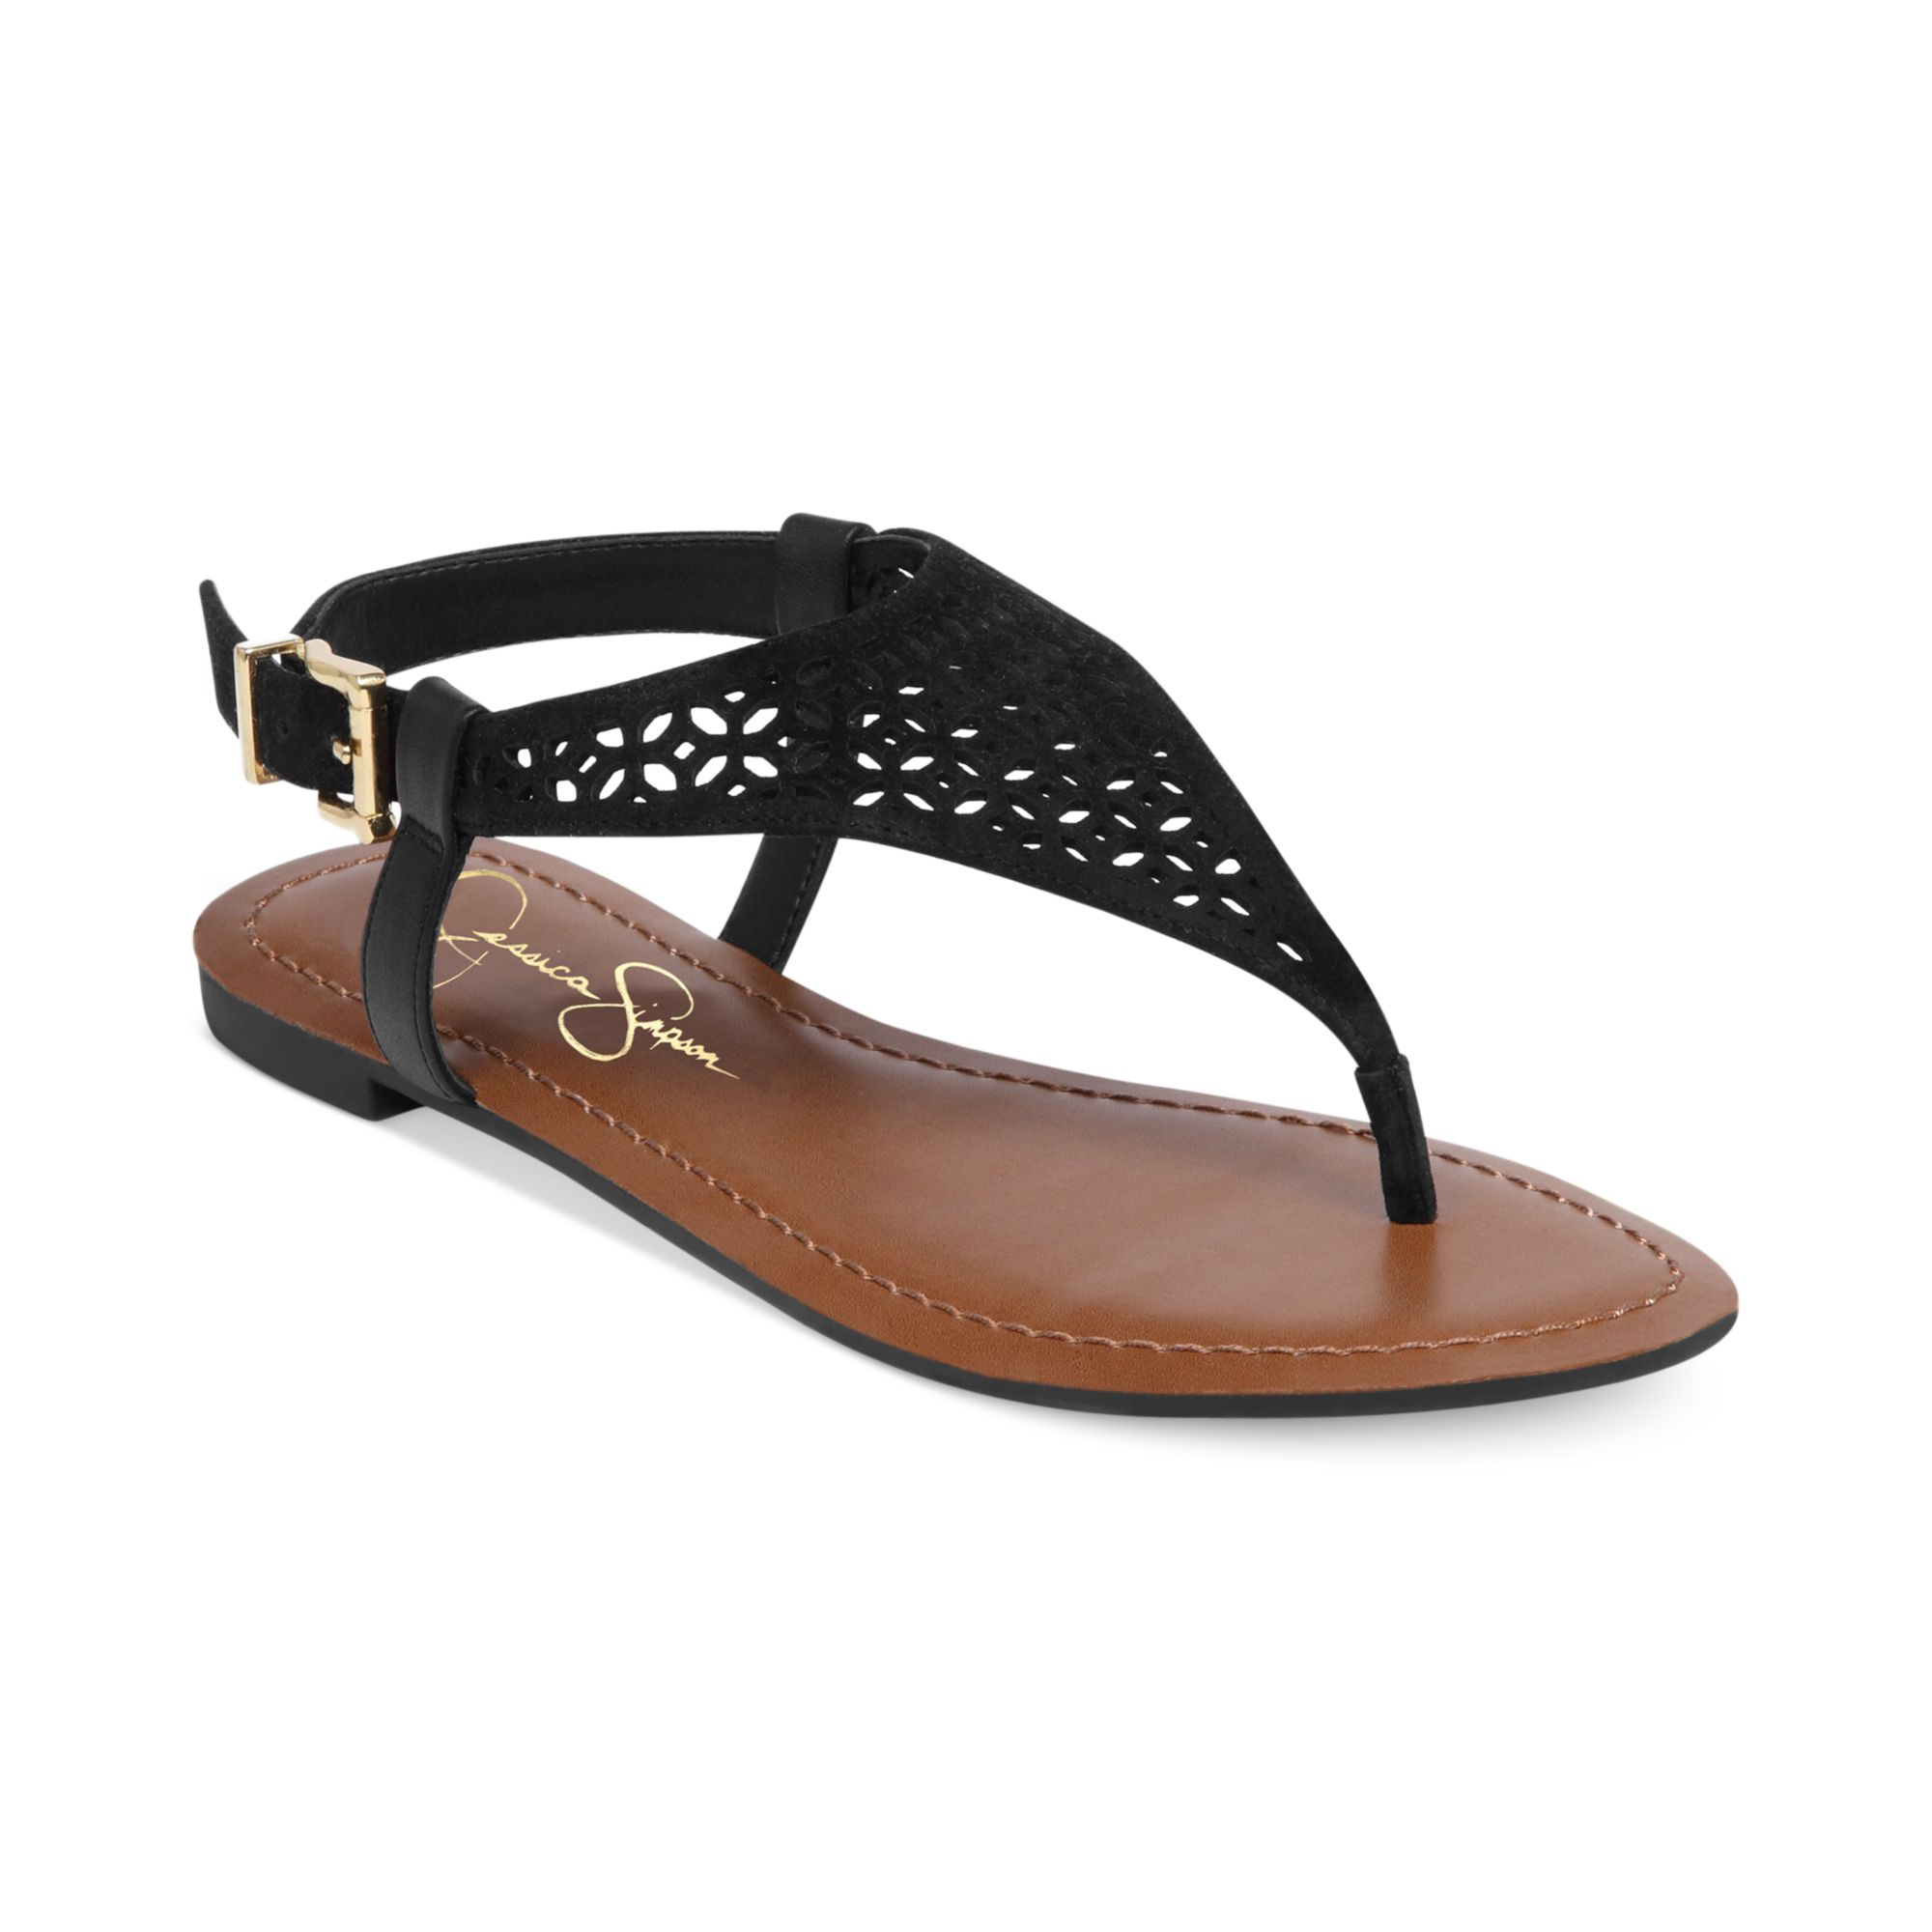 Jessica Simpson Grile Flat Thong Sandals in Black | Lyst